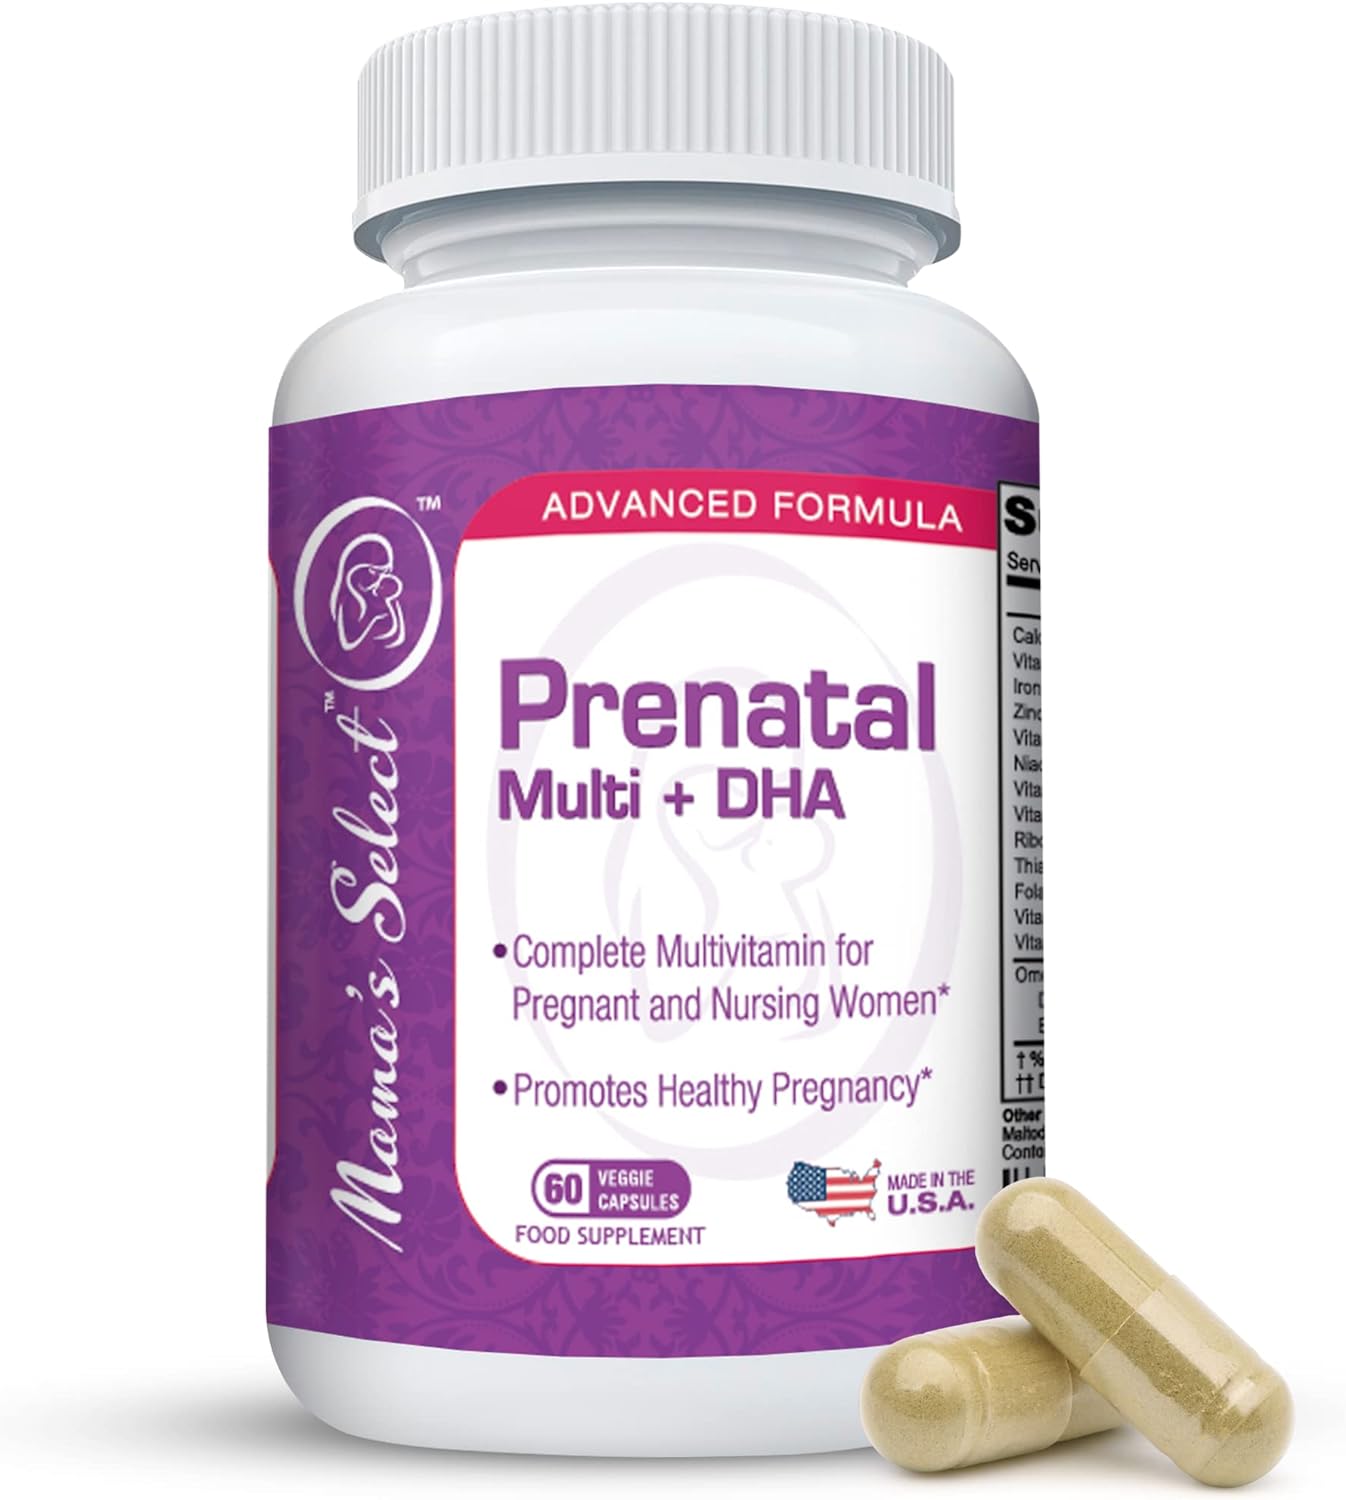 Mamas Select Prenatal Vitamins for Women with Iron, Vitamin D, DHA, and Folic Acid for Pregnant Women, Methyl Folate Safe for MTHFR - Slow-Release Supplement, Gentle on Stomach, 60 Veggie Capsules